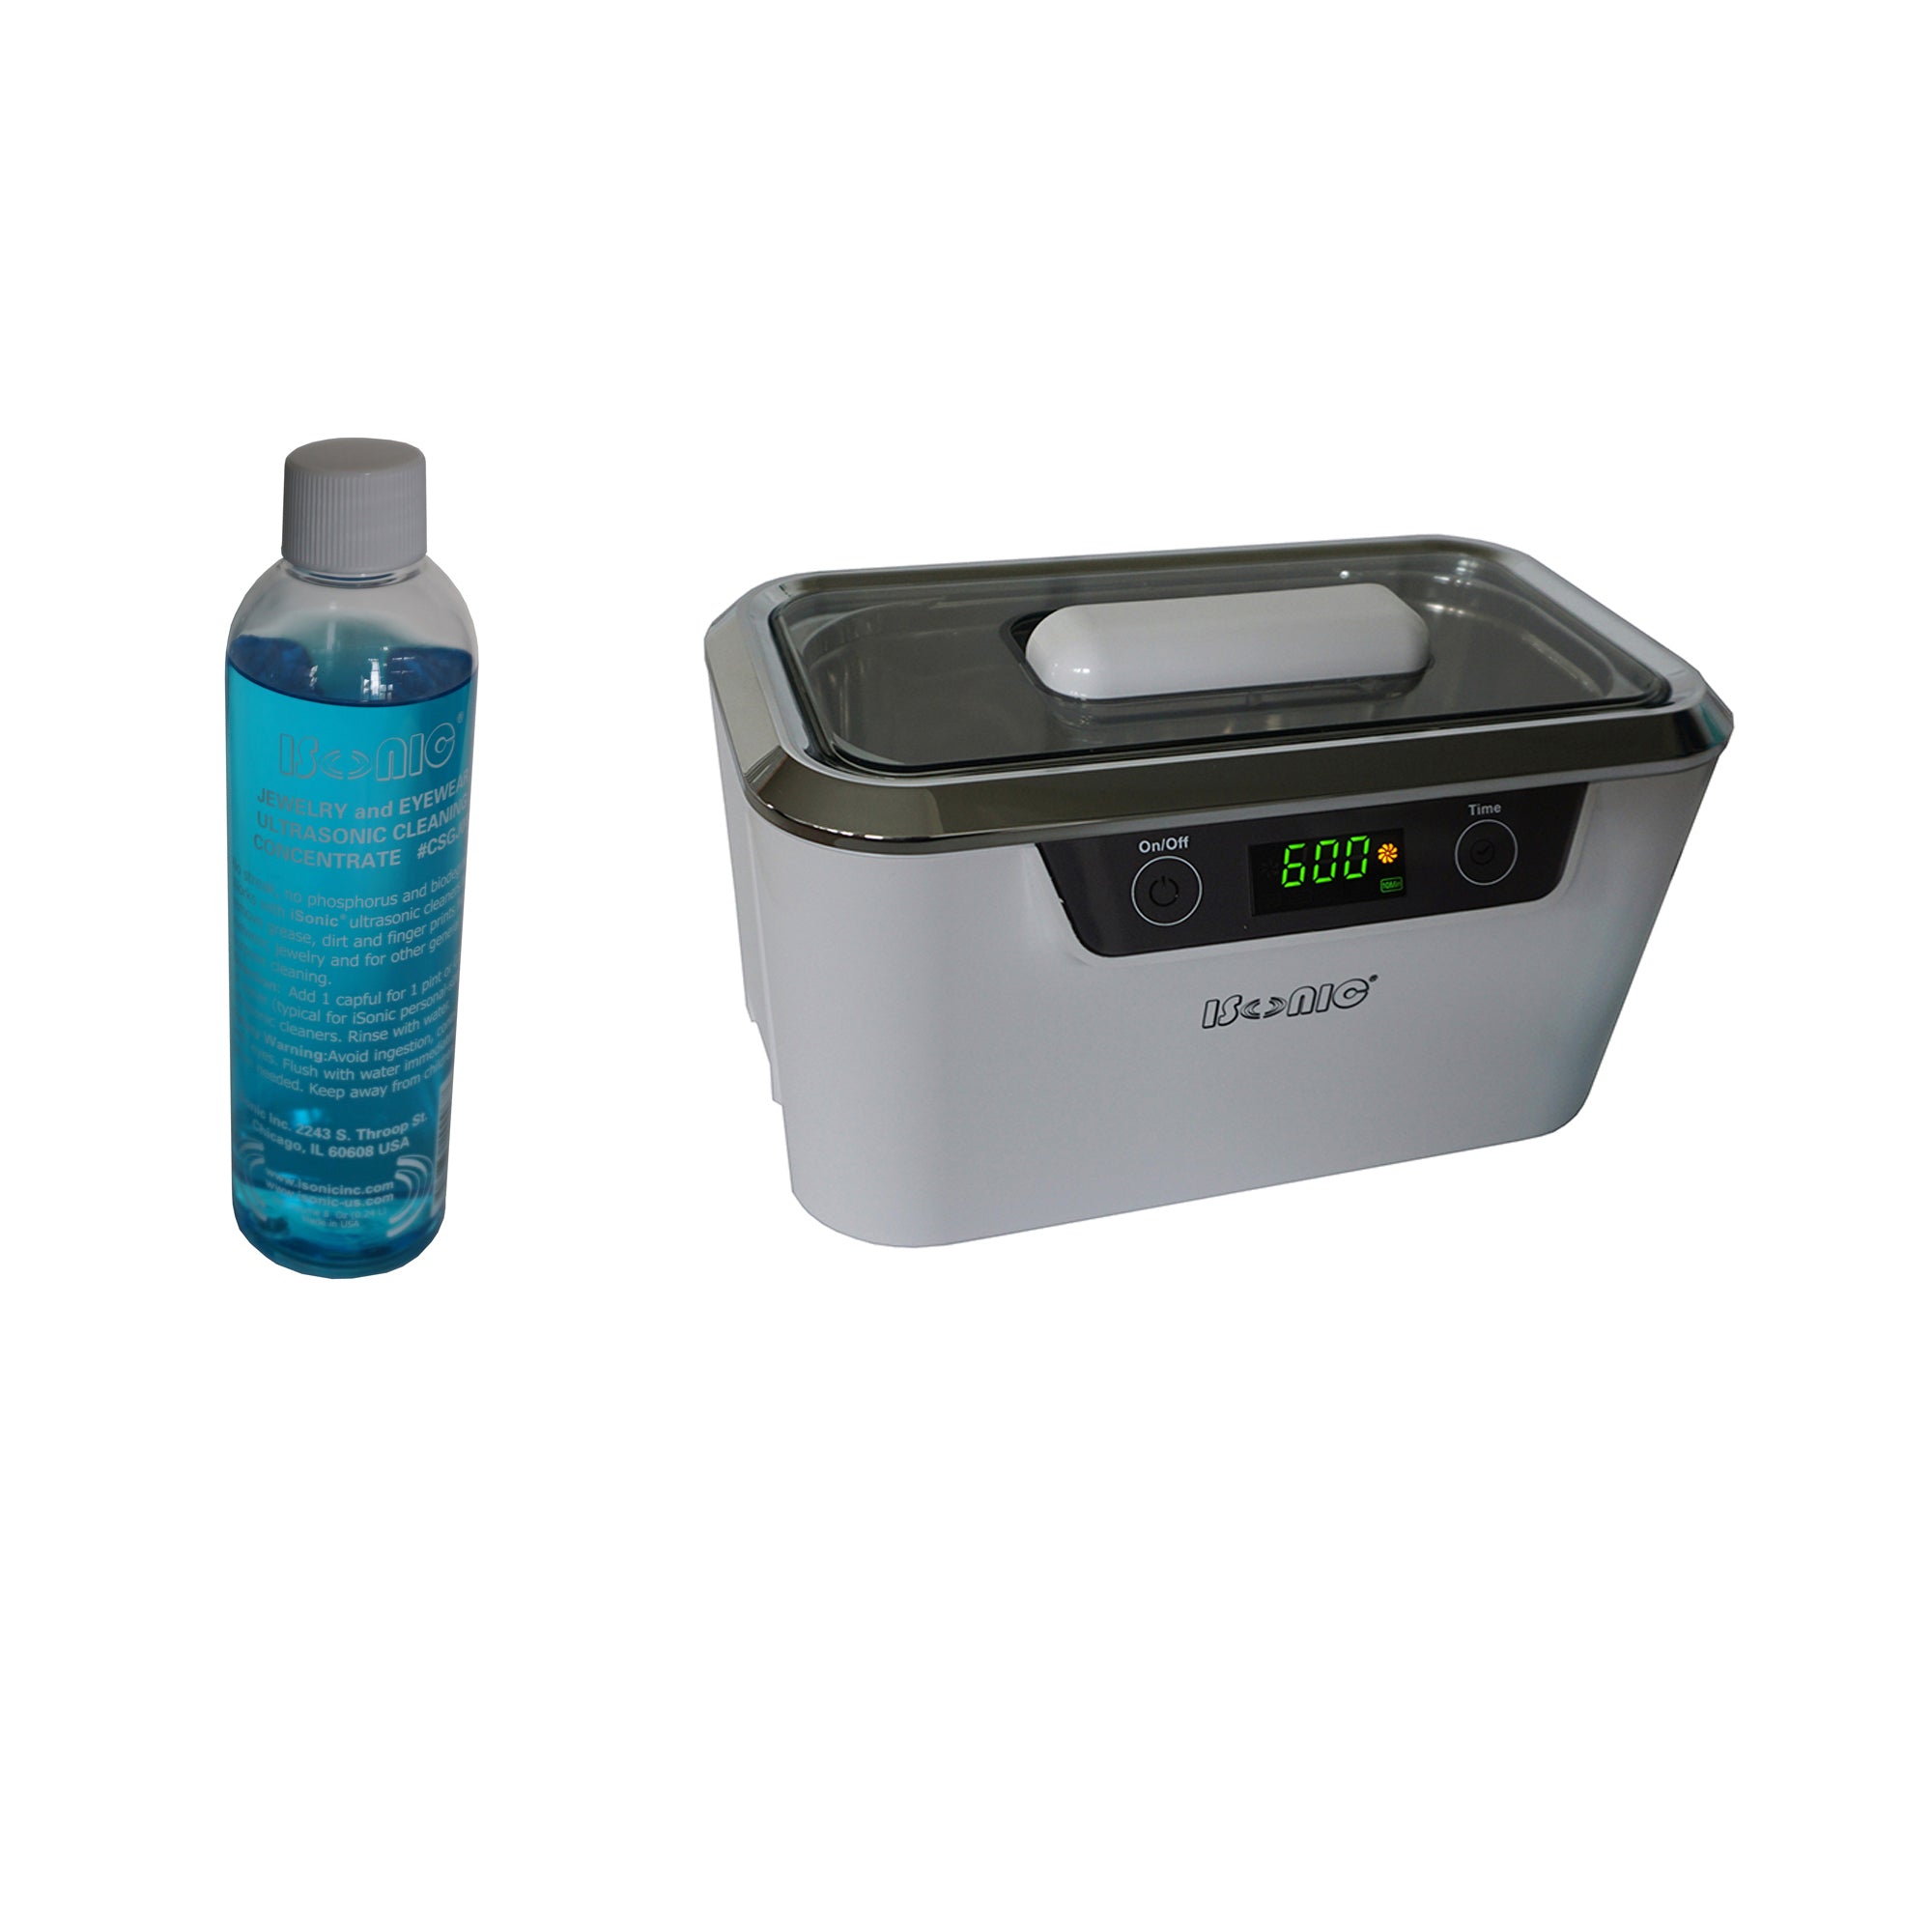 DS300+CSGJ01 | iSonic? Digital Touch Sensing Professional Ultrasonic Cleaner, with Jewelry/Eyewear Cleaning Solution Concentrate CSGJ01, 8OZ, Promotional Price!